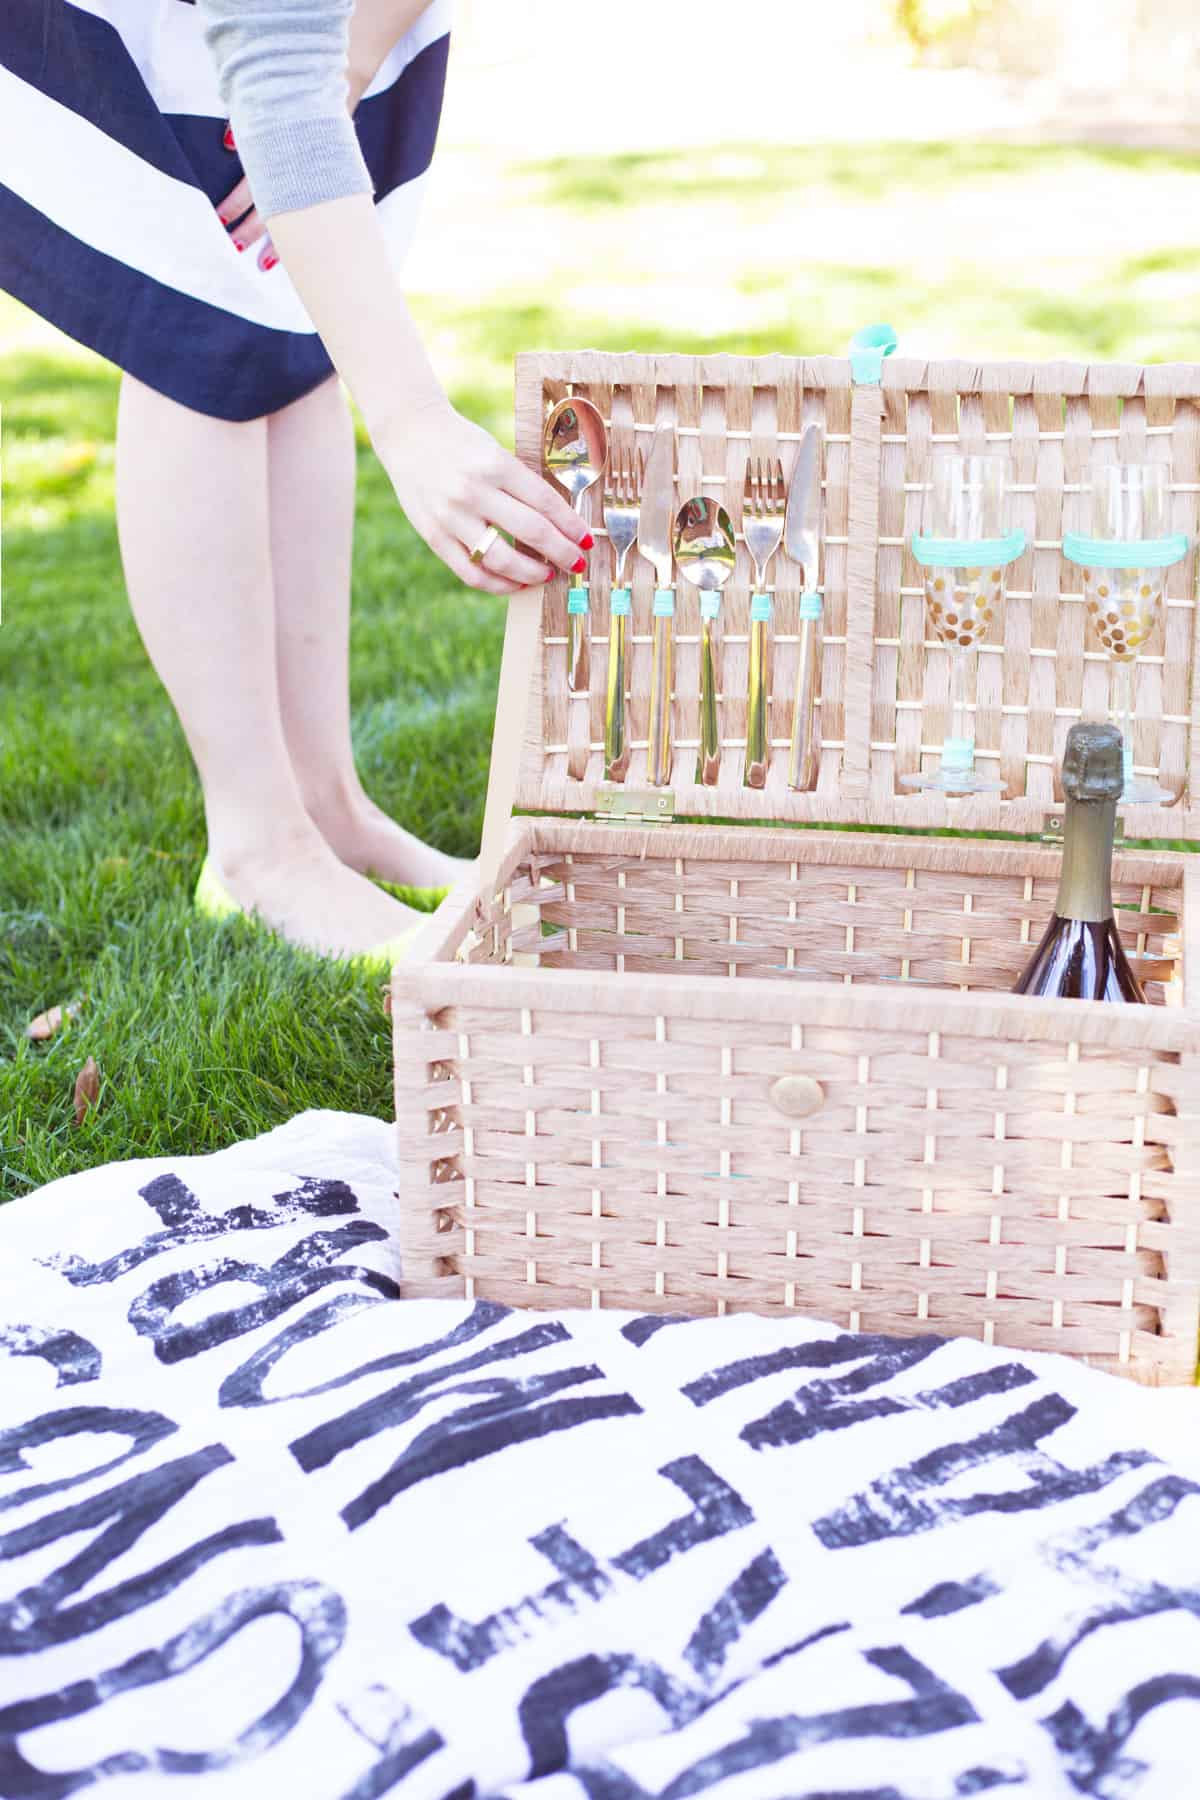 10 Diy Baskets For The Perfect Sunday Picnic